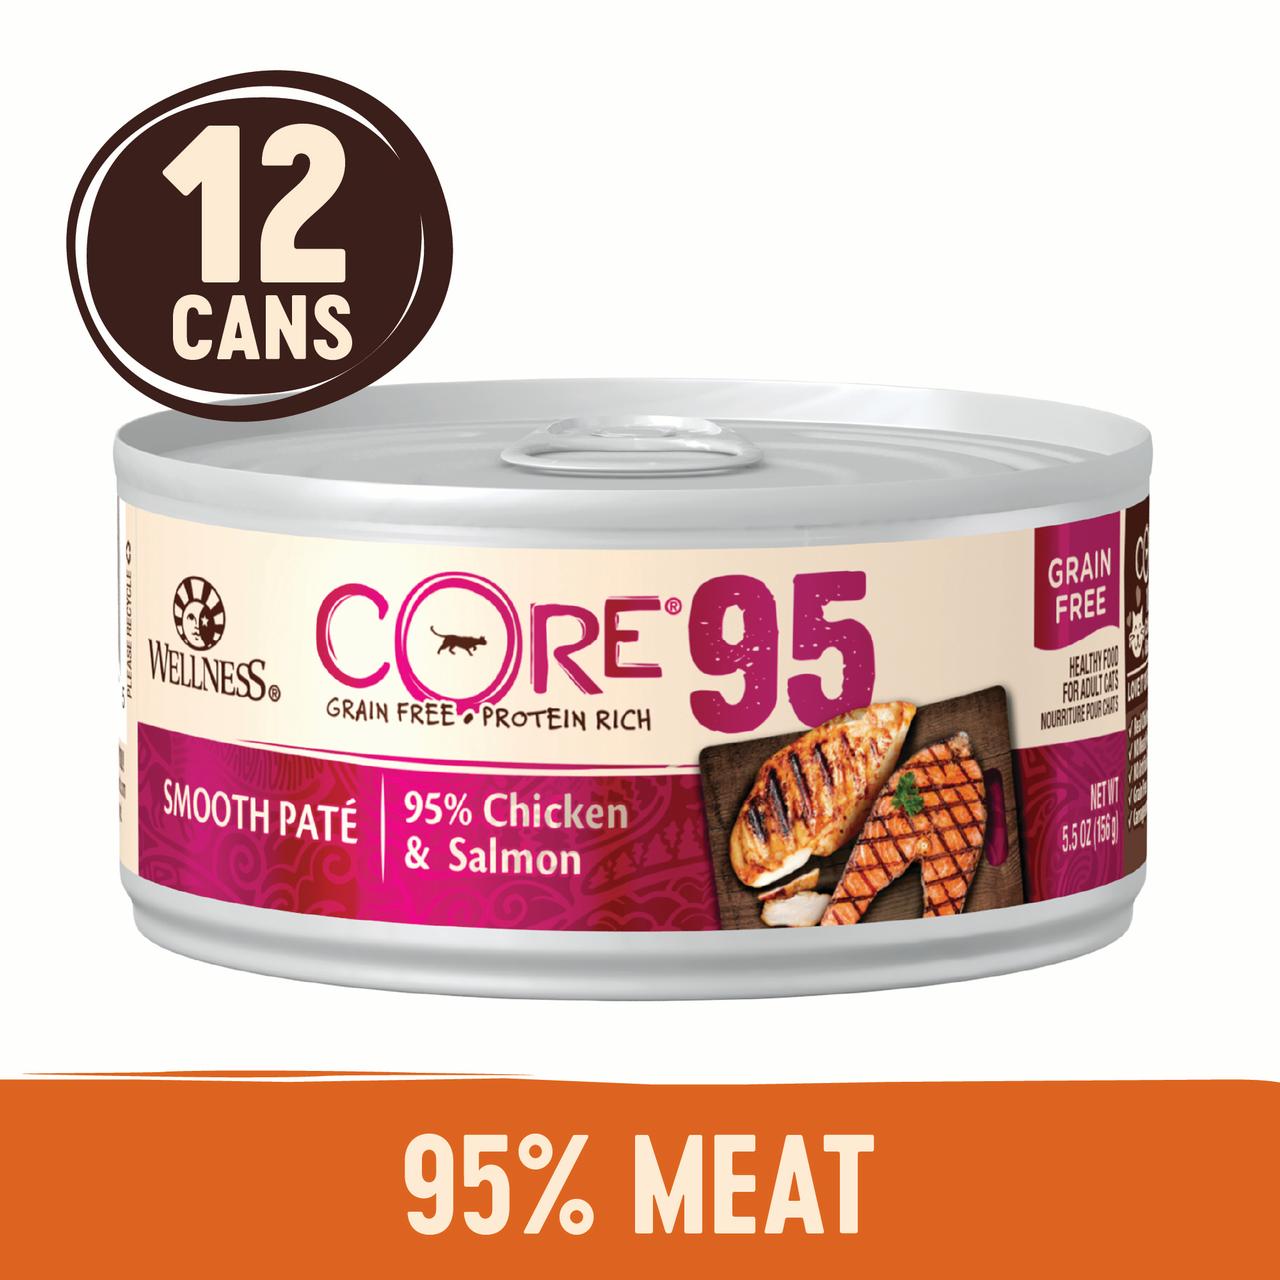 Wellness CORE 95% Wet Cat Food, Chicken & Salmon, 5.5 oz (Pack of 12) - image 1 of 2